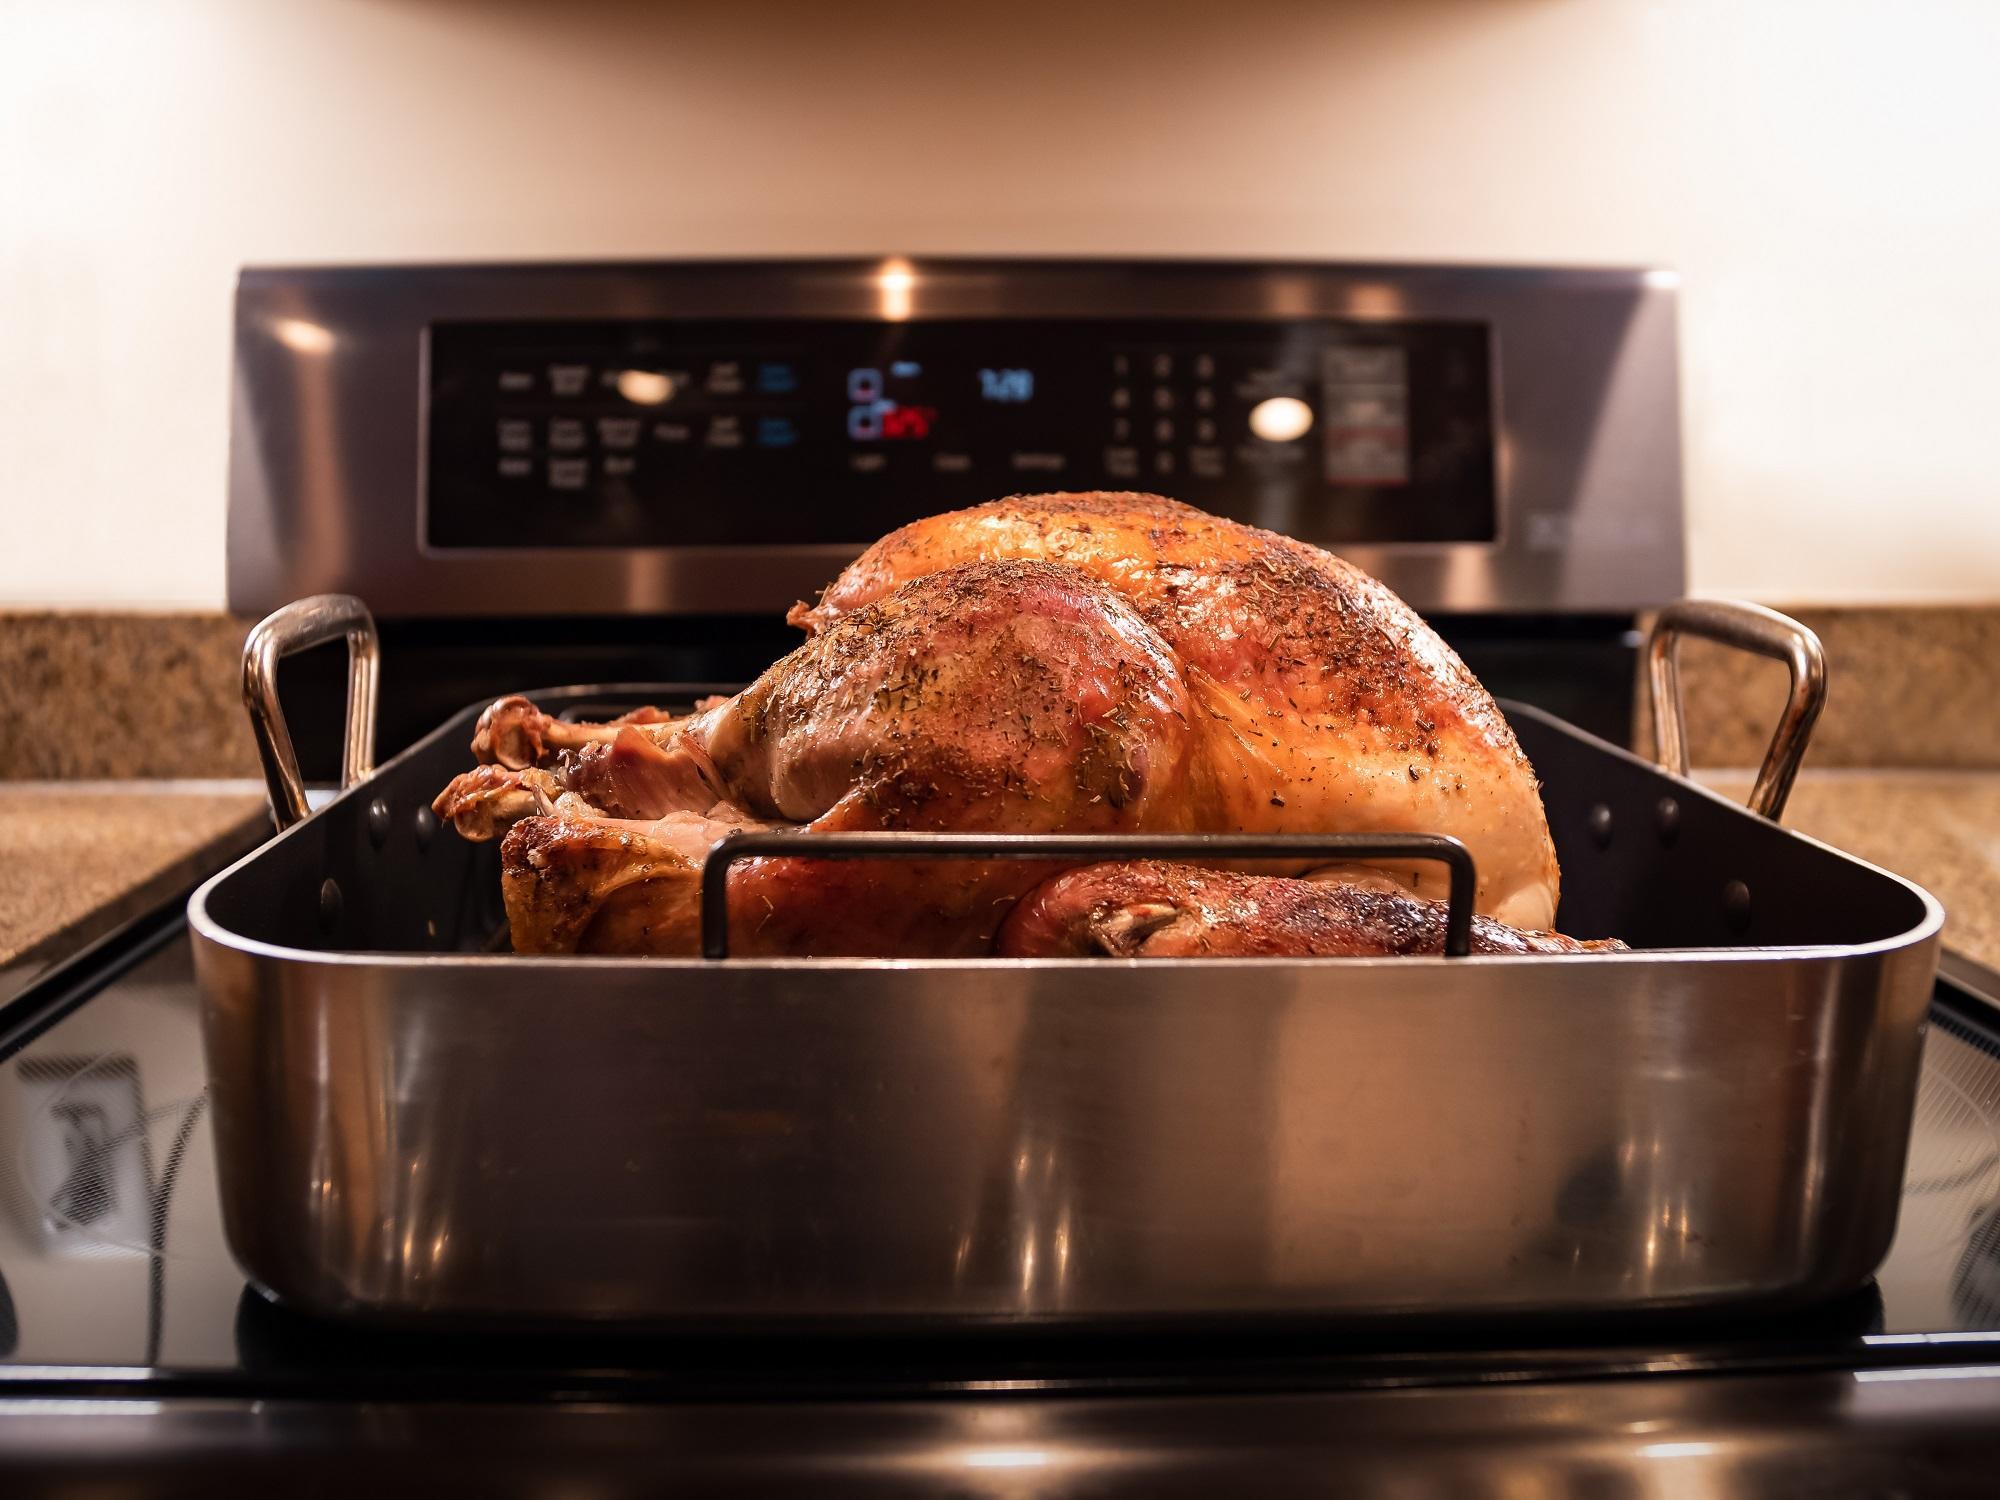 A cooked and seasoned turkey cooling in a roasting pan on a stovetop.